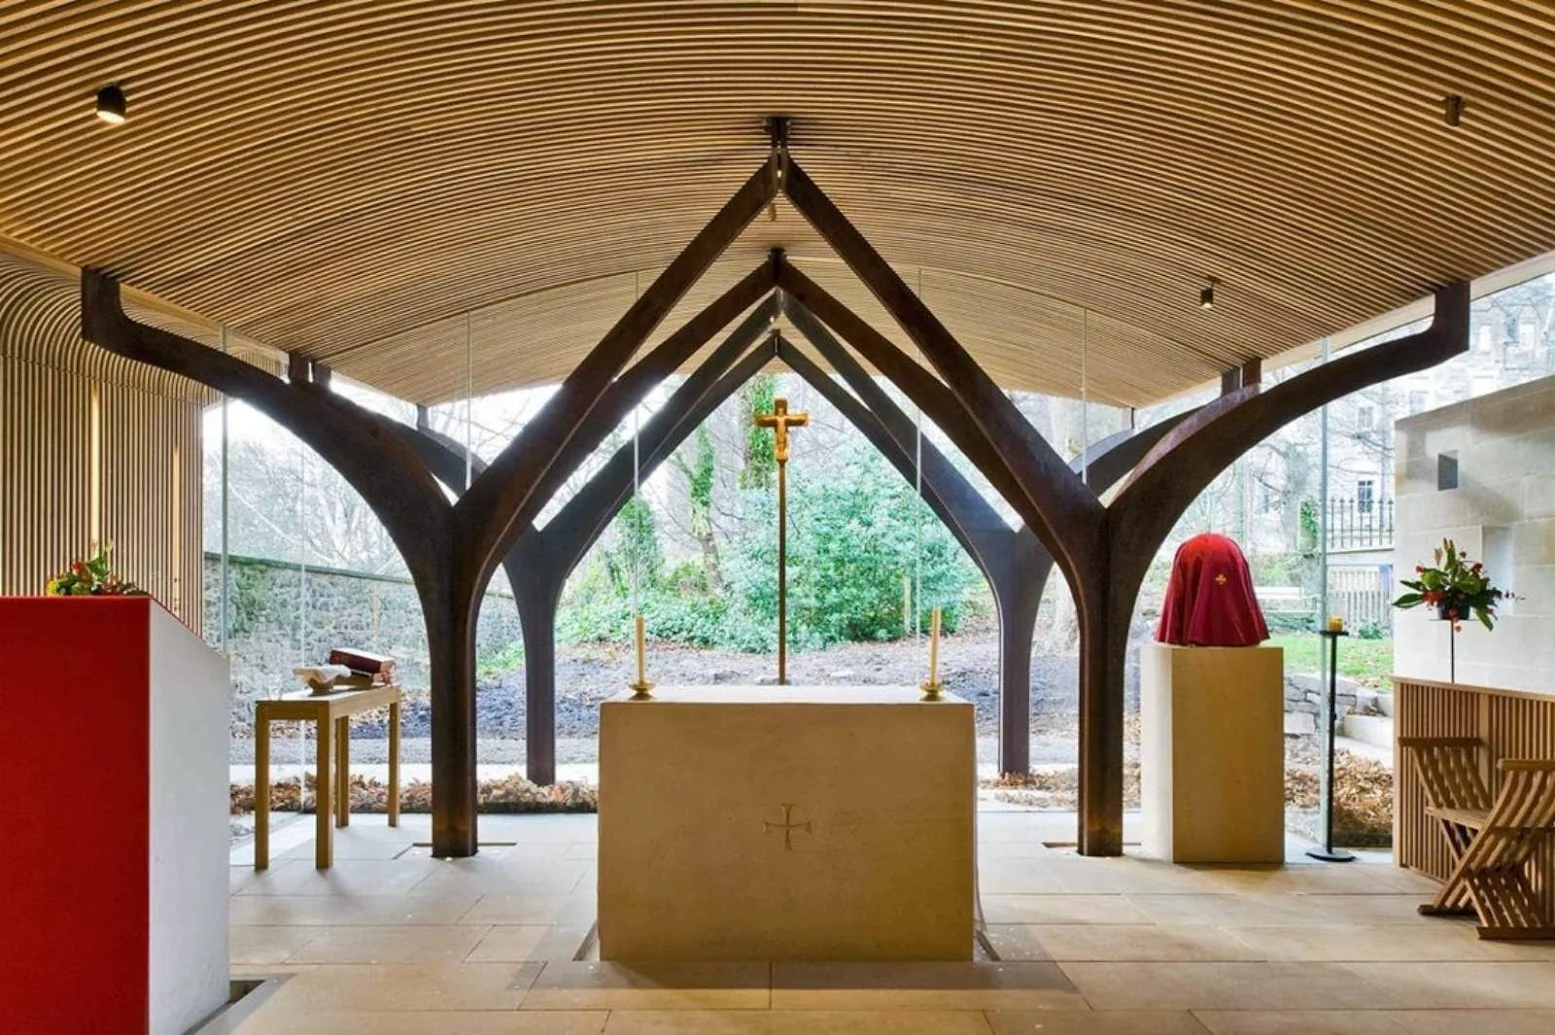 10-Chapel-of-Saint-Albert-the-Great-by-Simpson-&-Brown-Architects